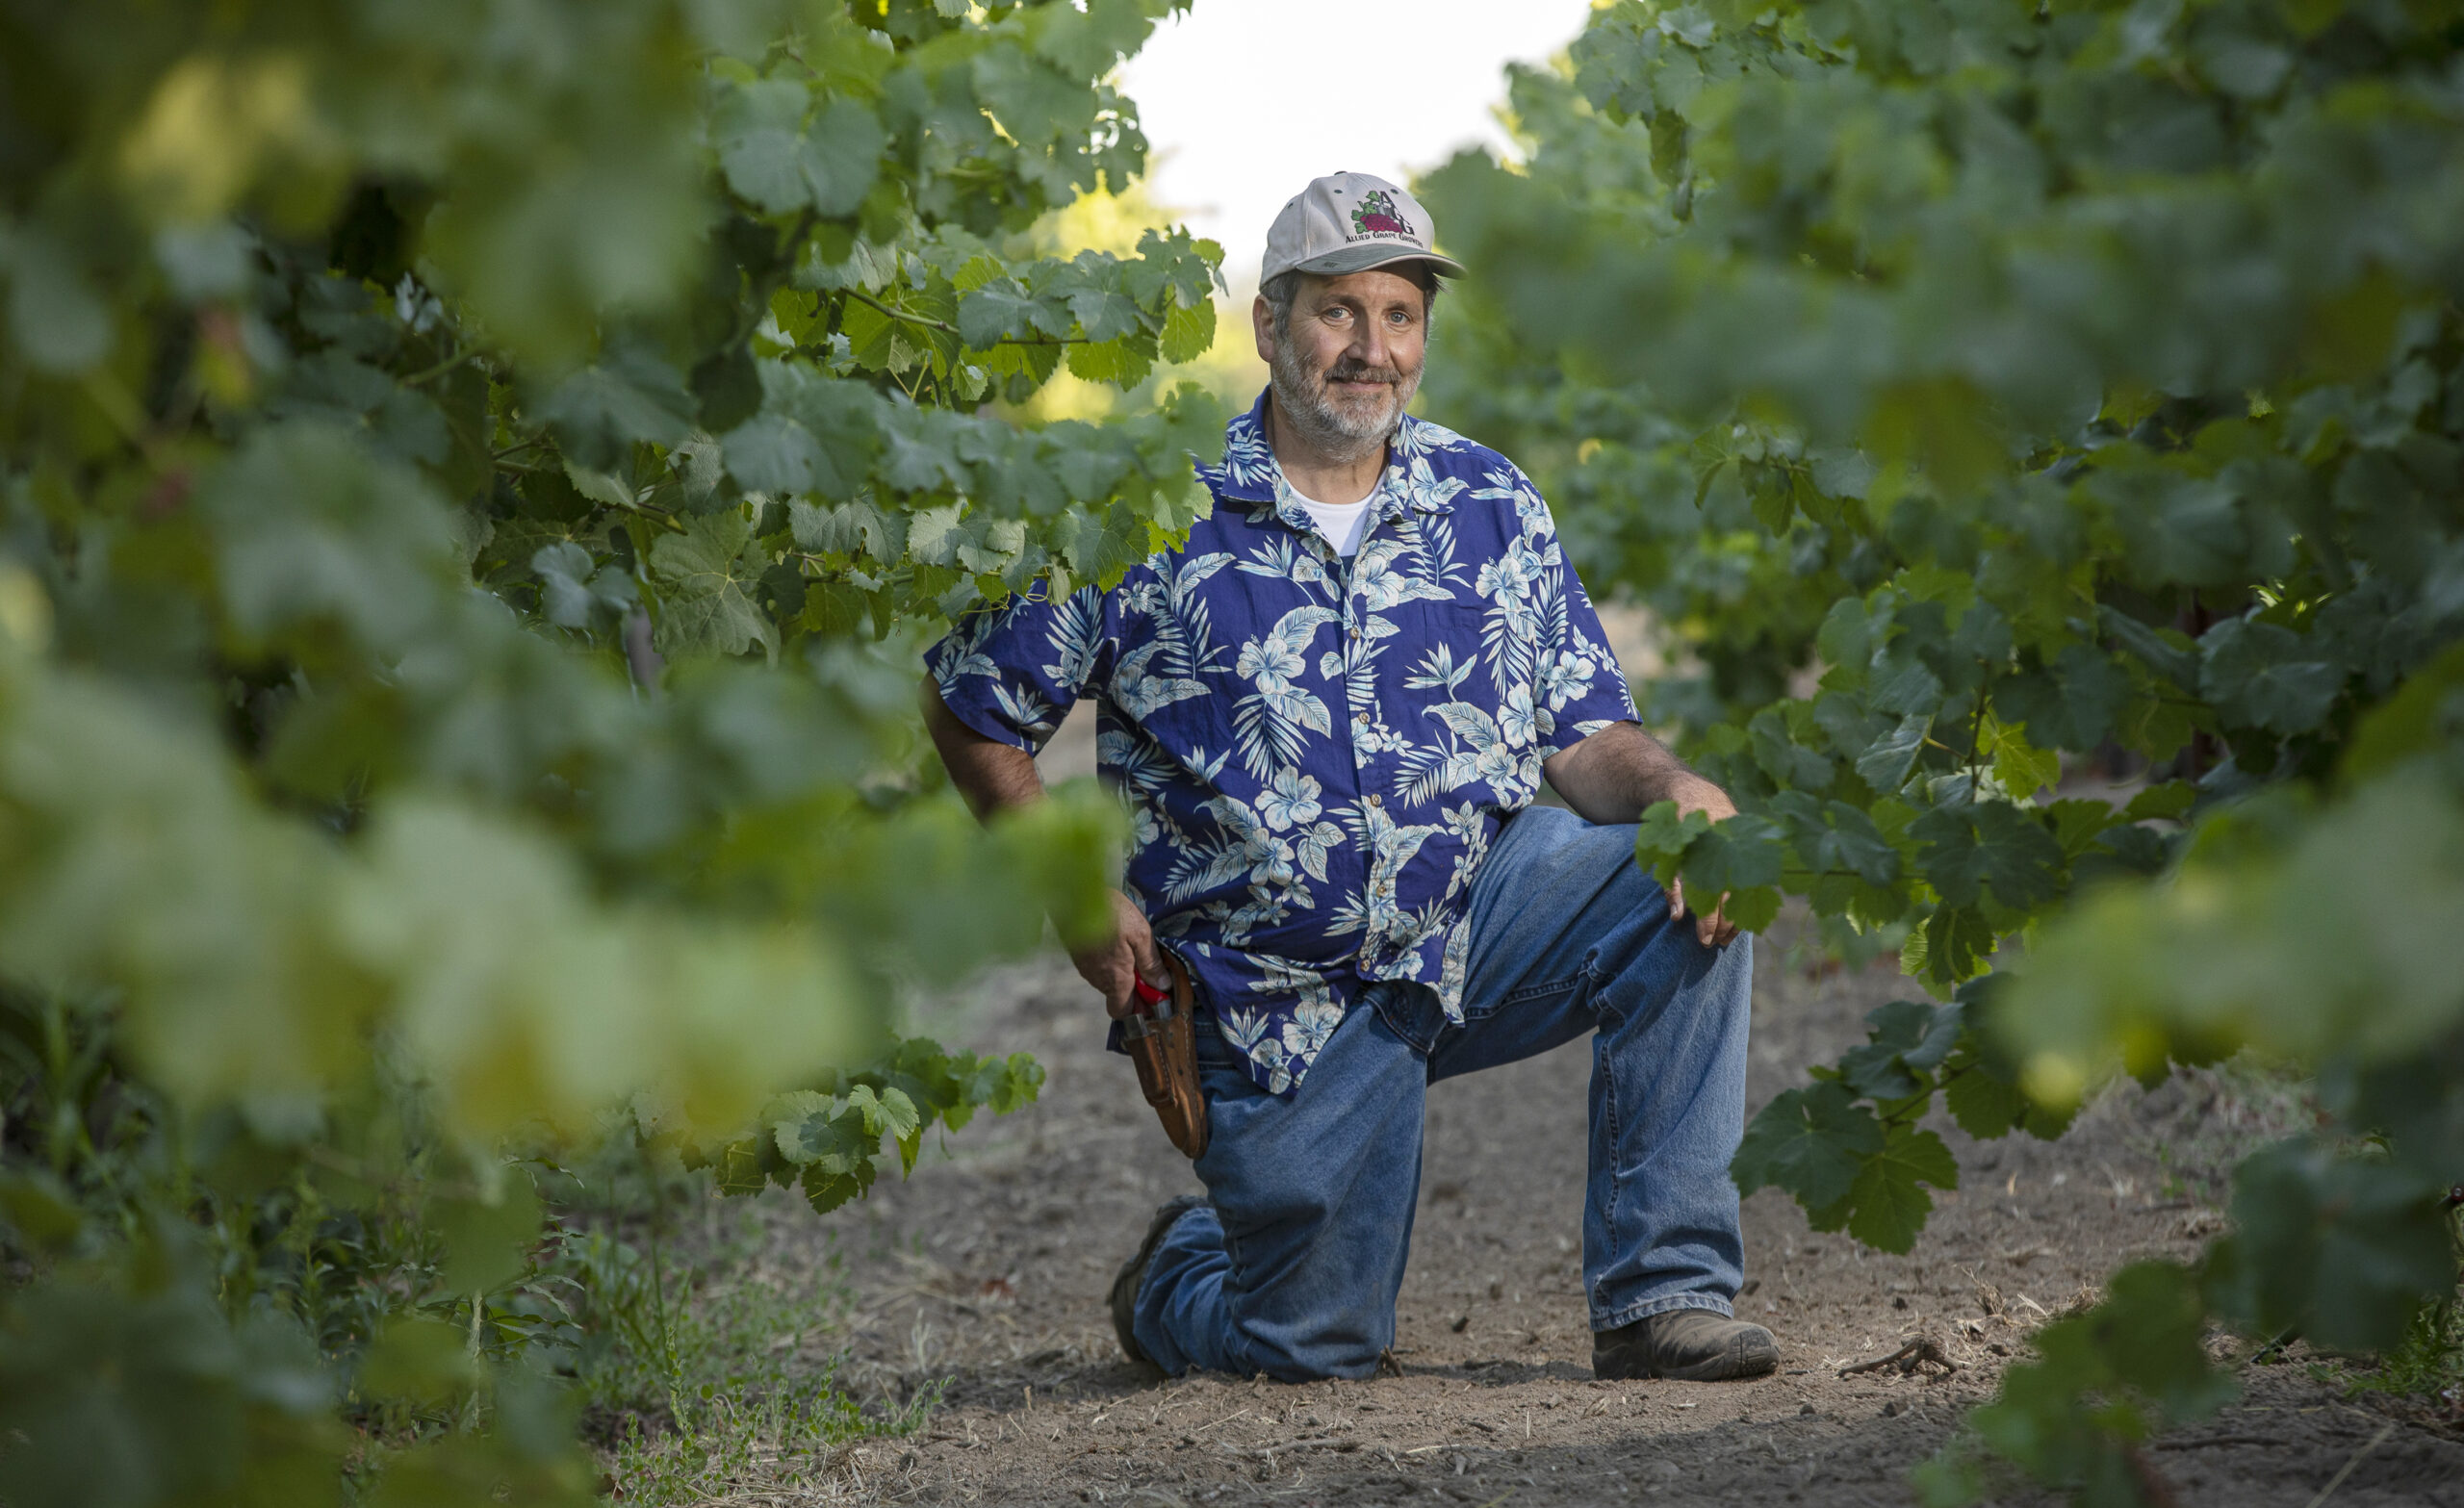 Grower Peter Fannuci specializes in Trouseau Gris and his family have been growing in Fulton for over 4 decades, July 23, 2022. (Chad Surmick / Press Democrat)